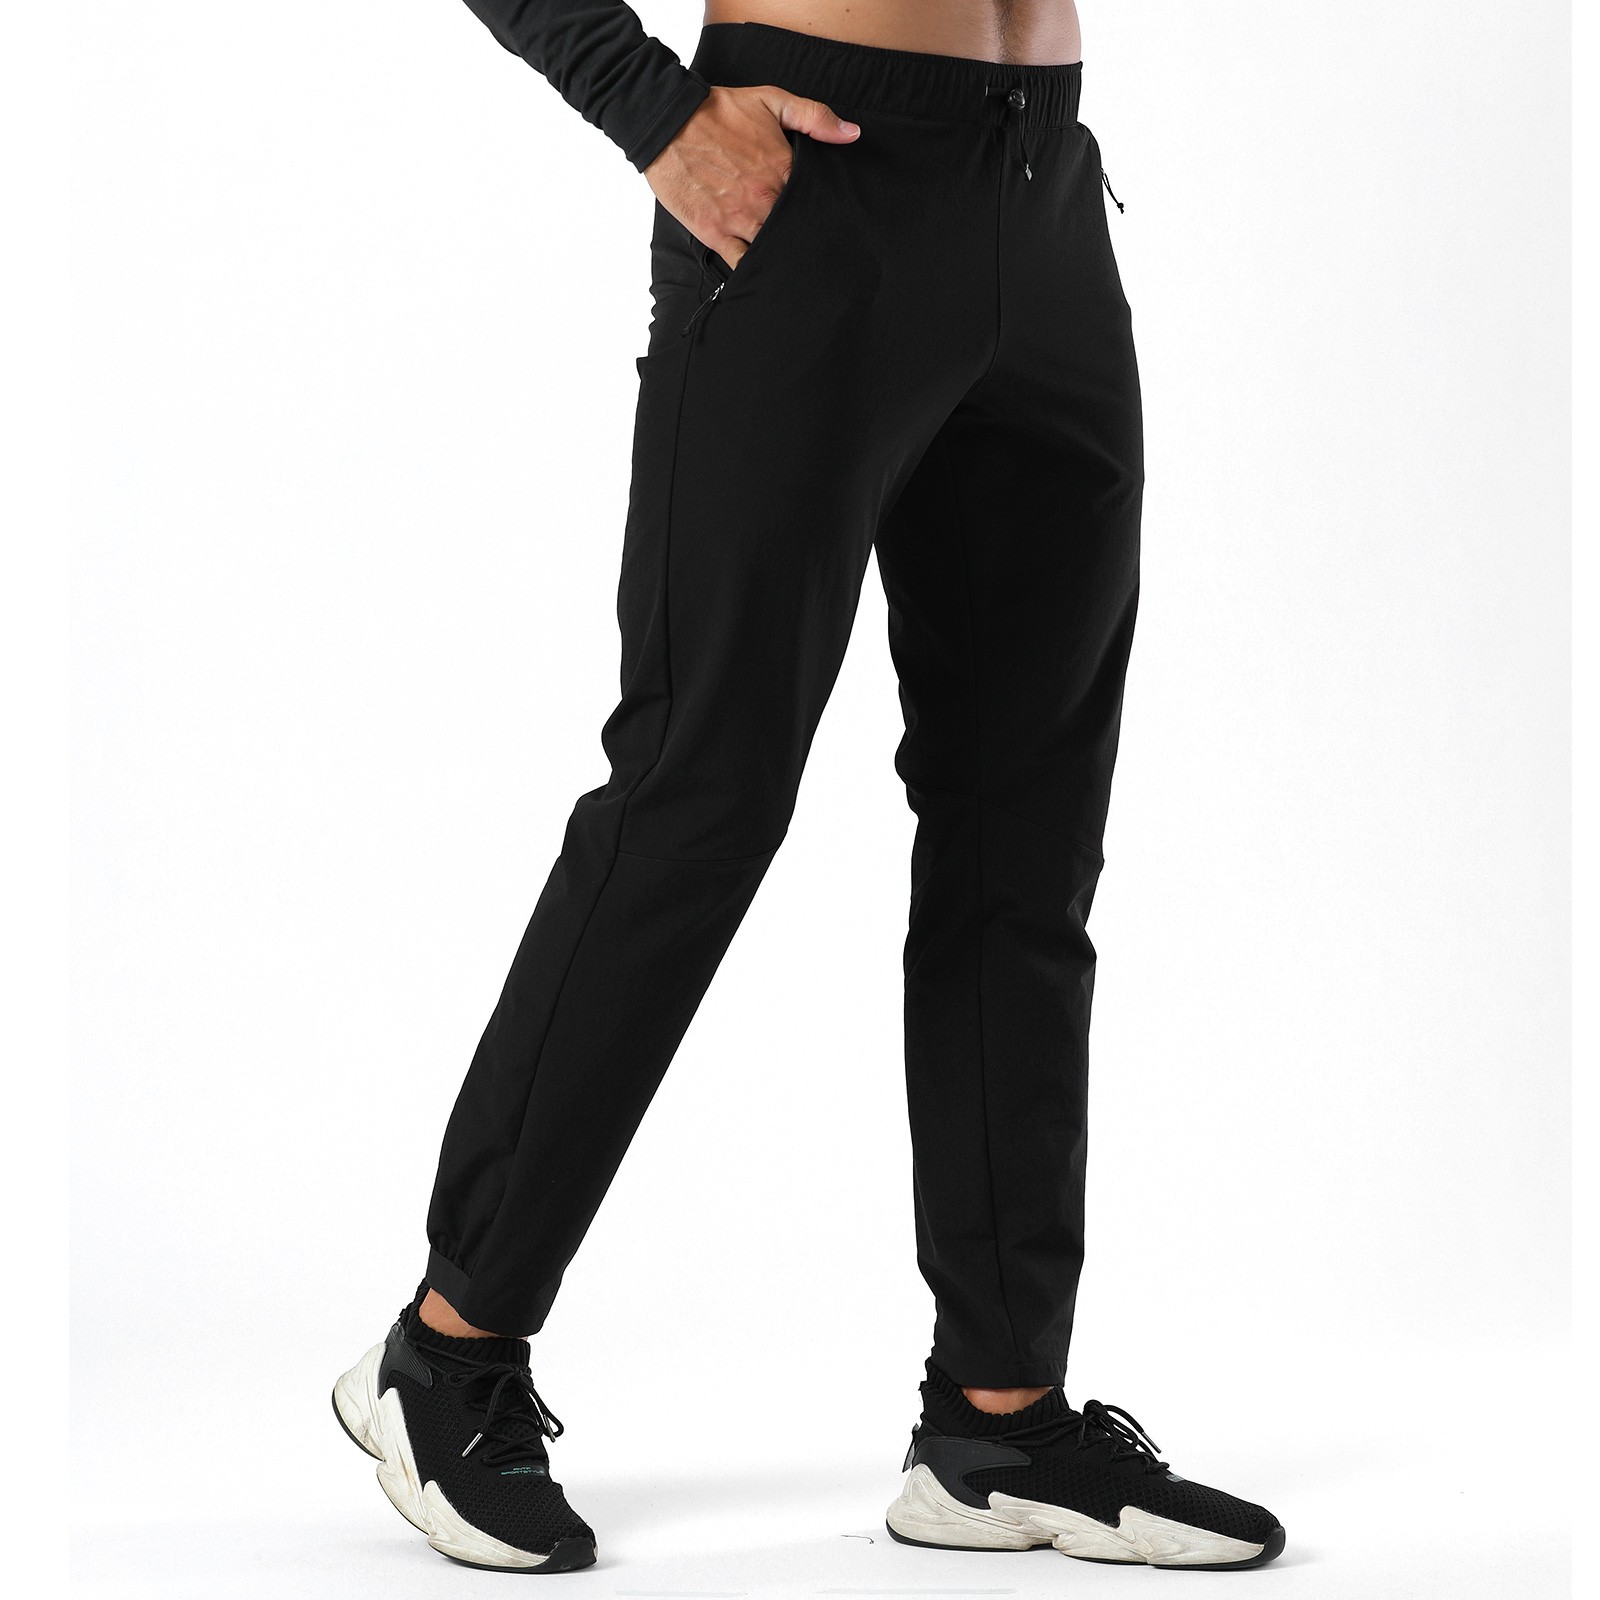 AONIJIE FM5140 Men Sports Running Long Pants Four Seasons Nylon Elastic Cycling Fitness Pants with Pocket Quick Drying Trousers